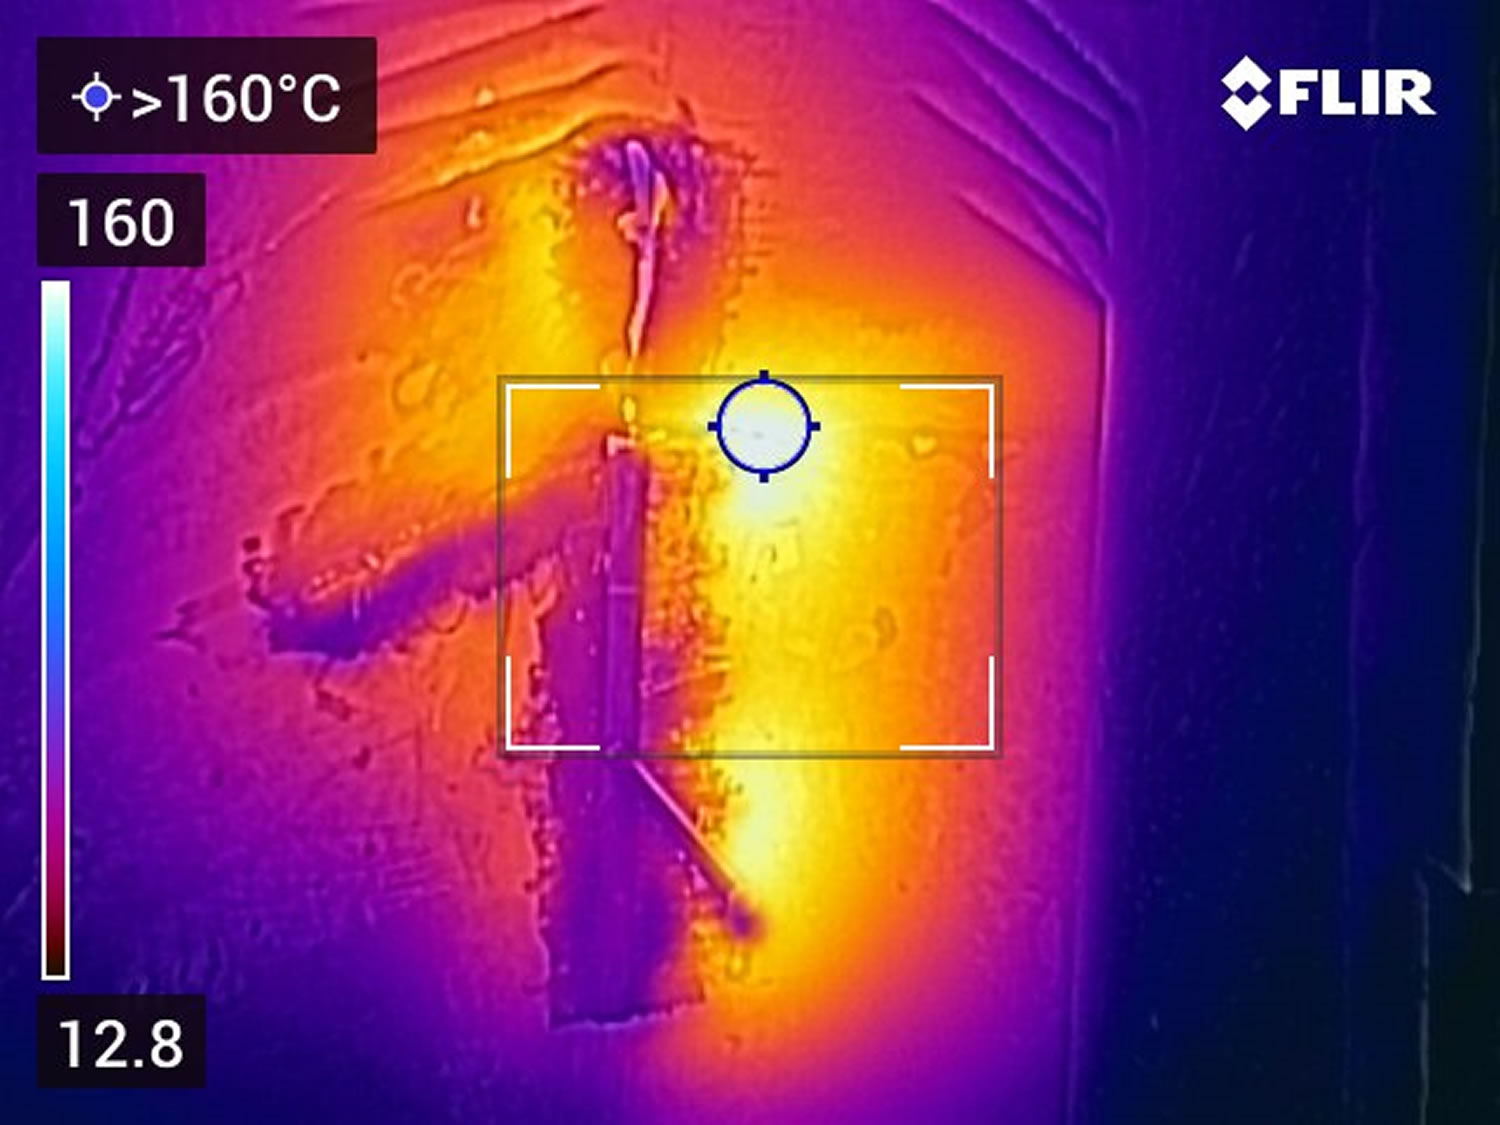 On site thermal imaging heat saturation assurance and evidence capture